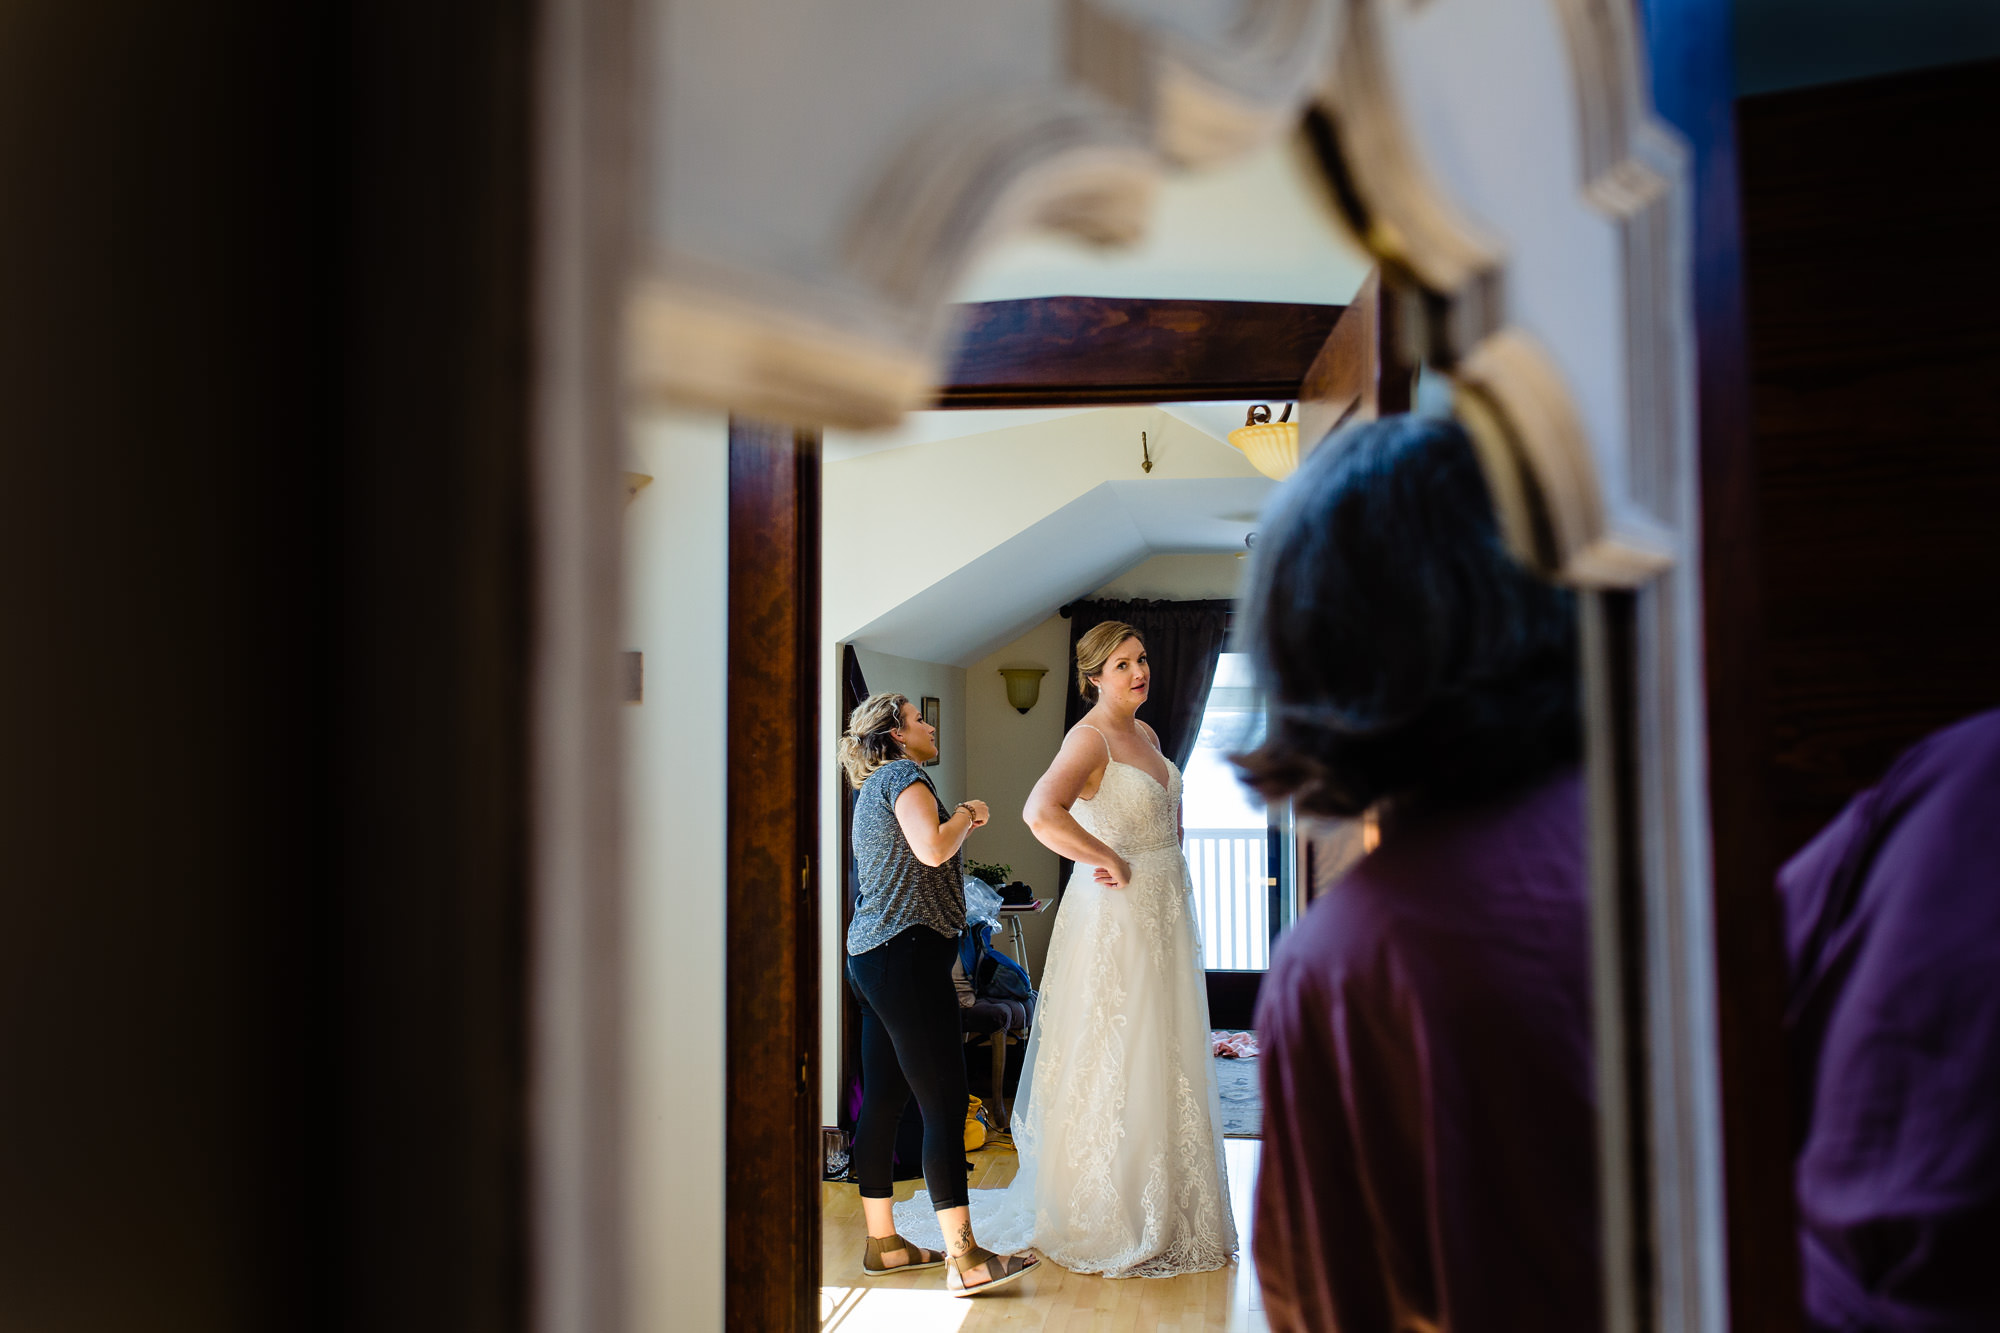 The mother of the bride looks in on the bride as she gets dressed